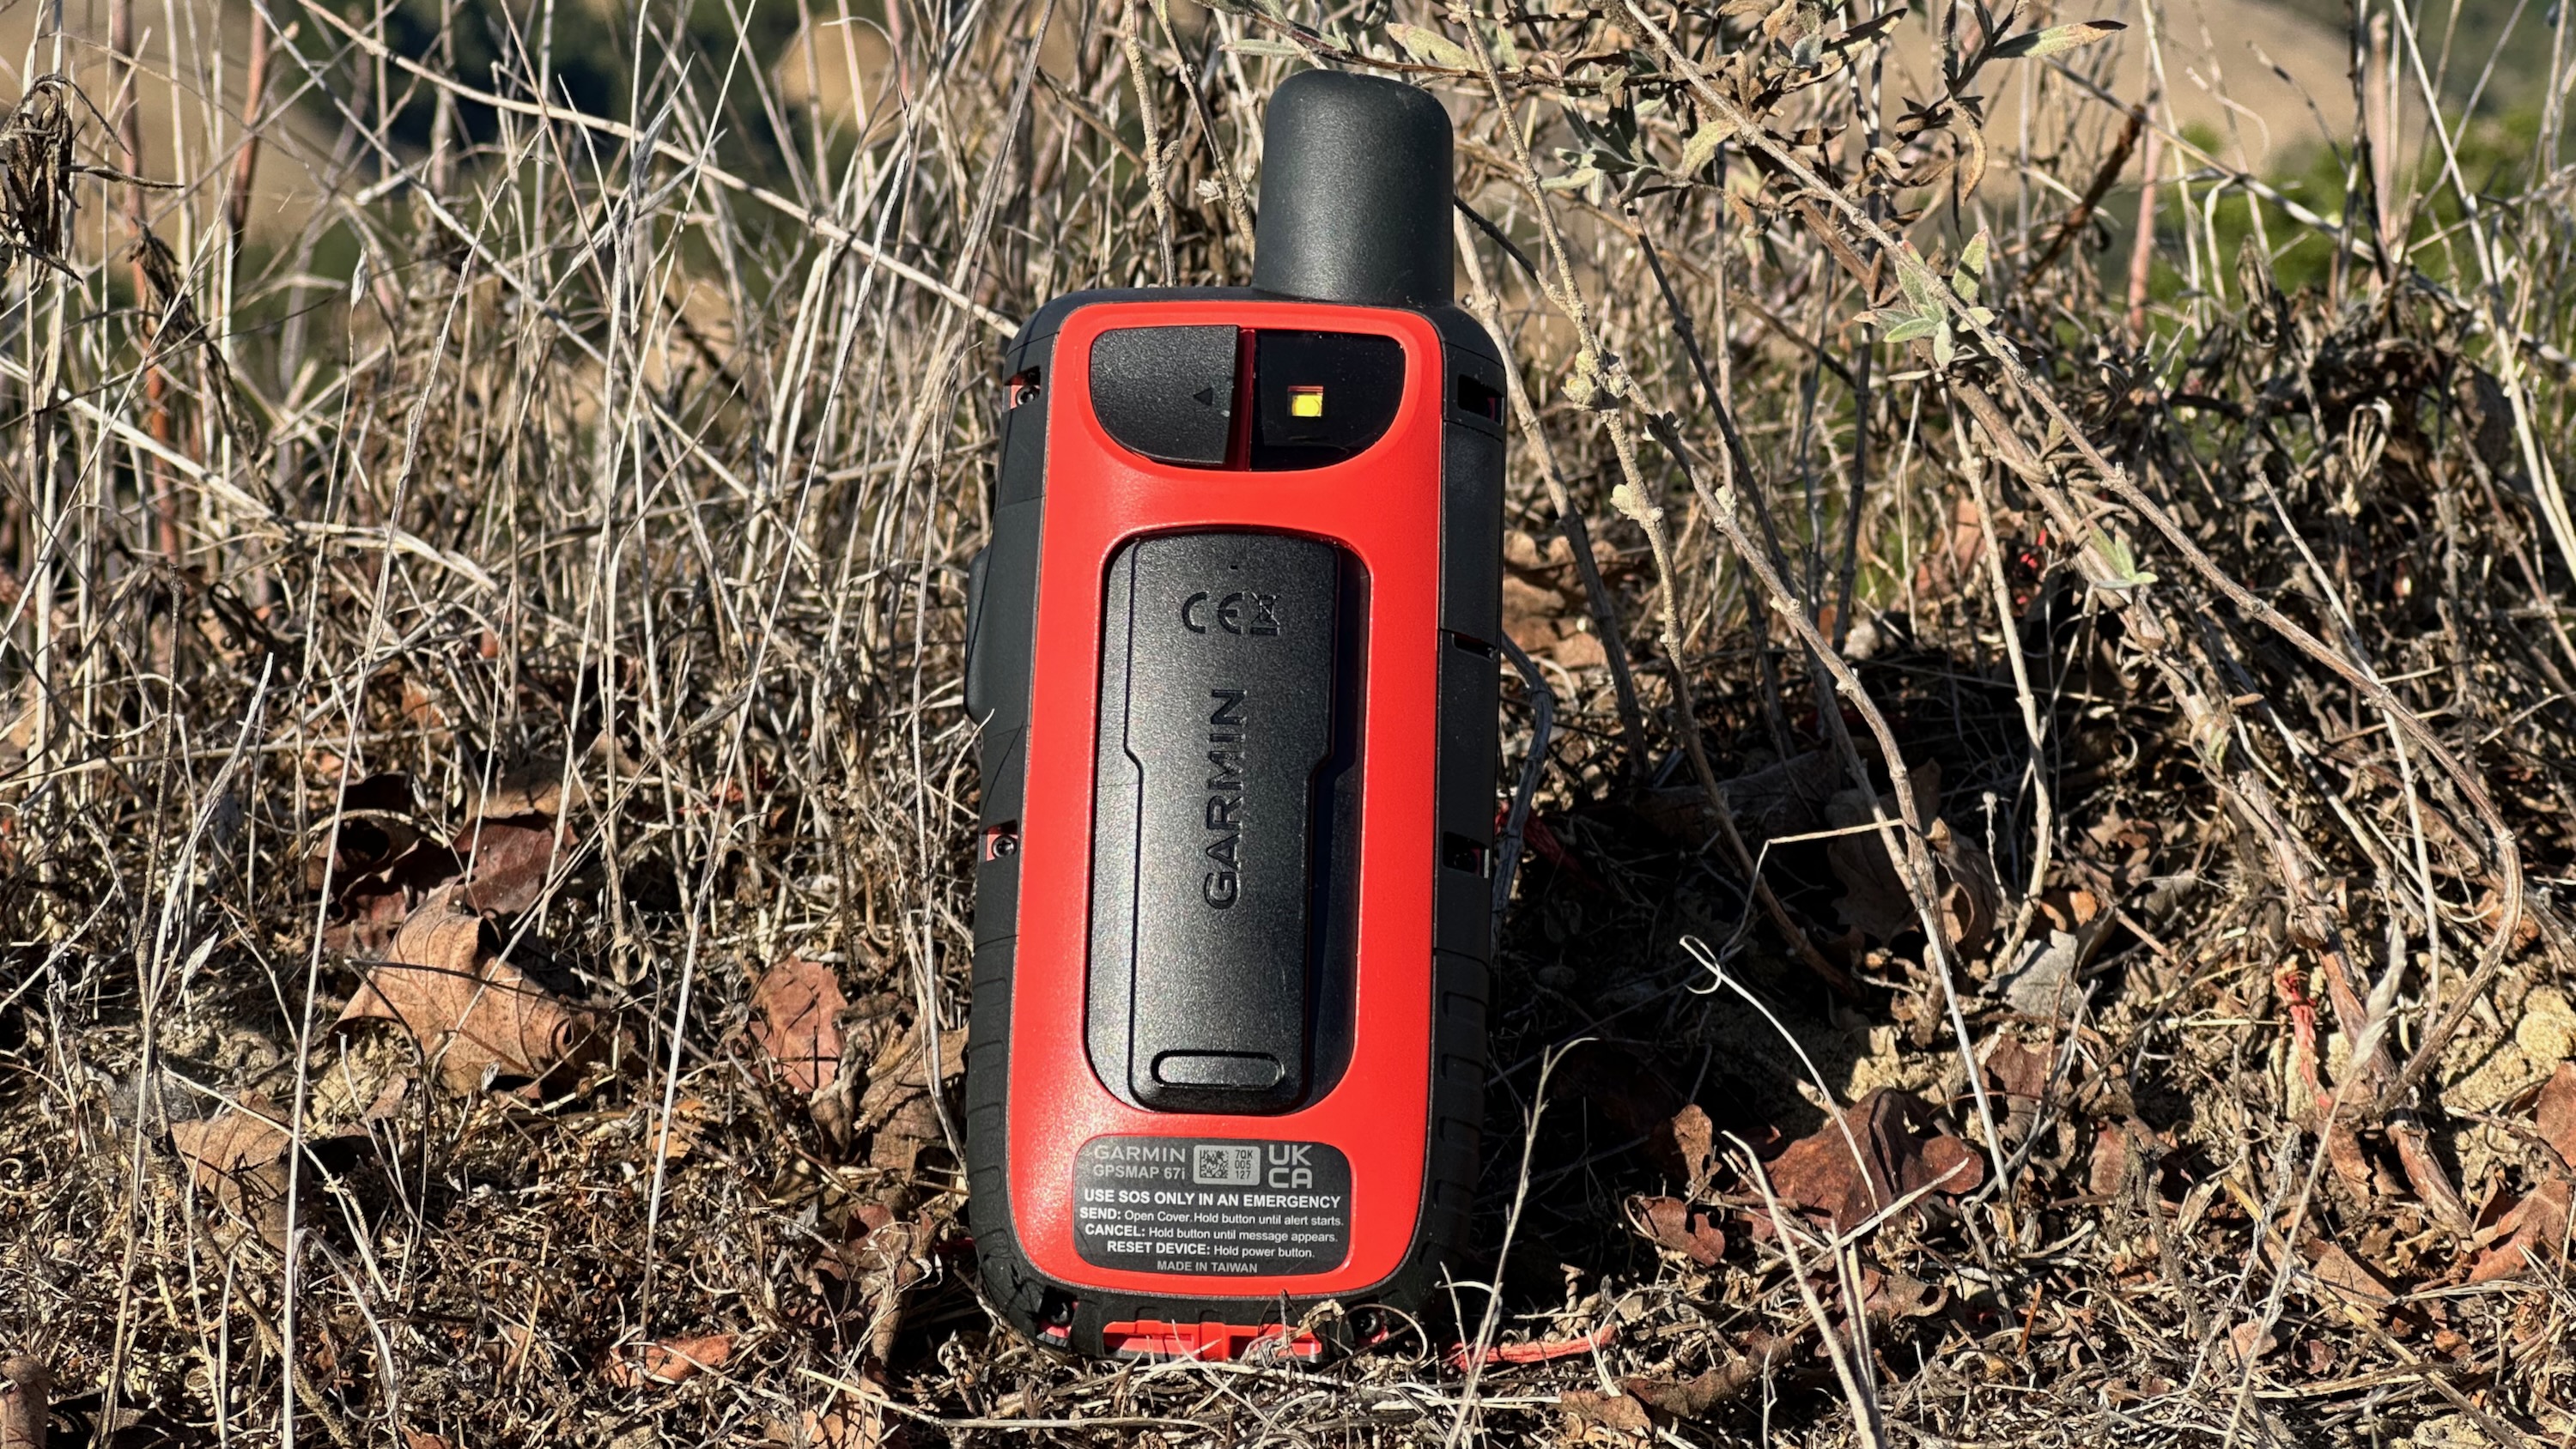 A rear view of the Garmin GPSMAP 67i